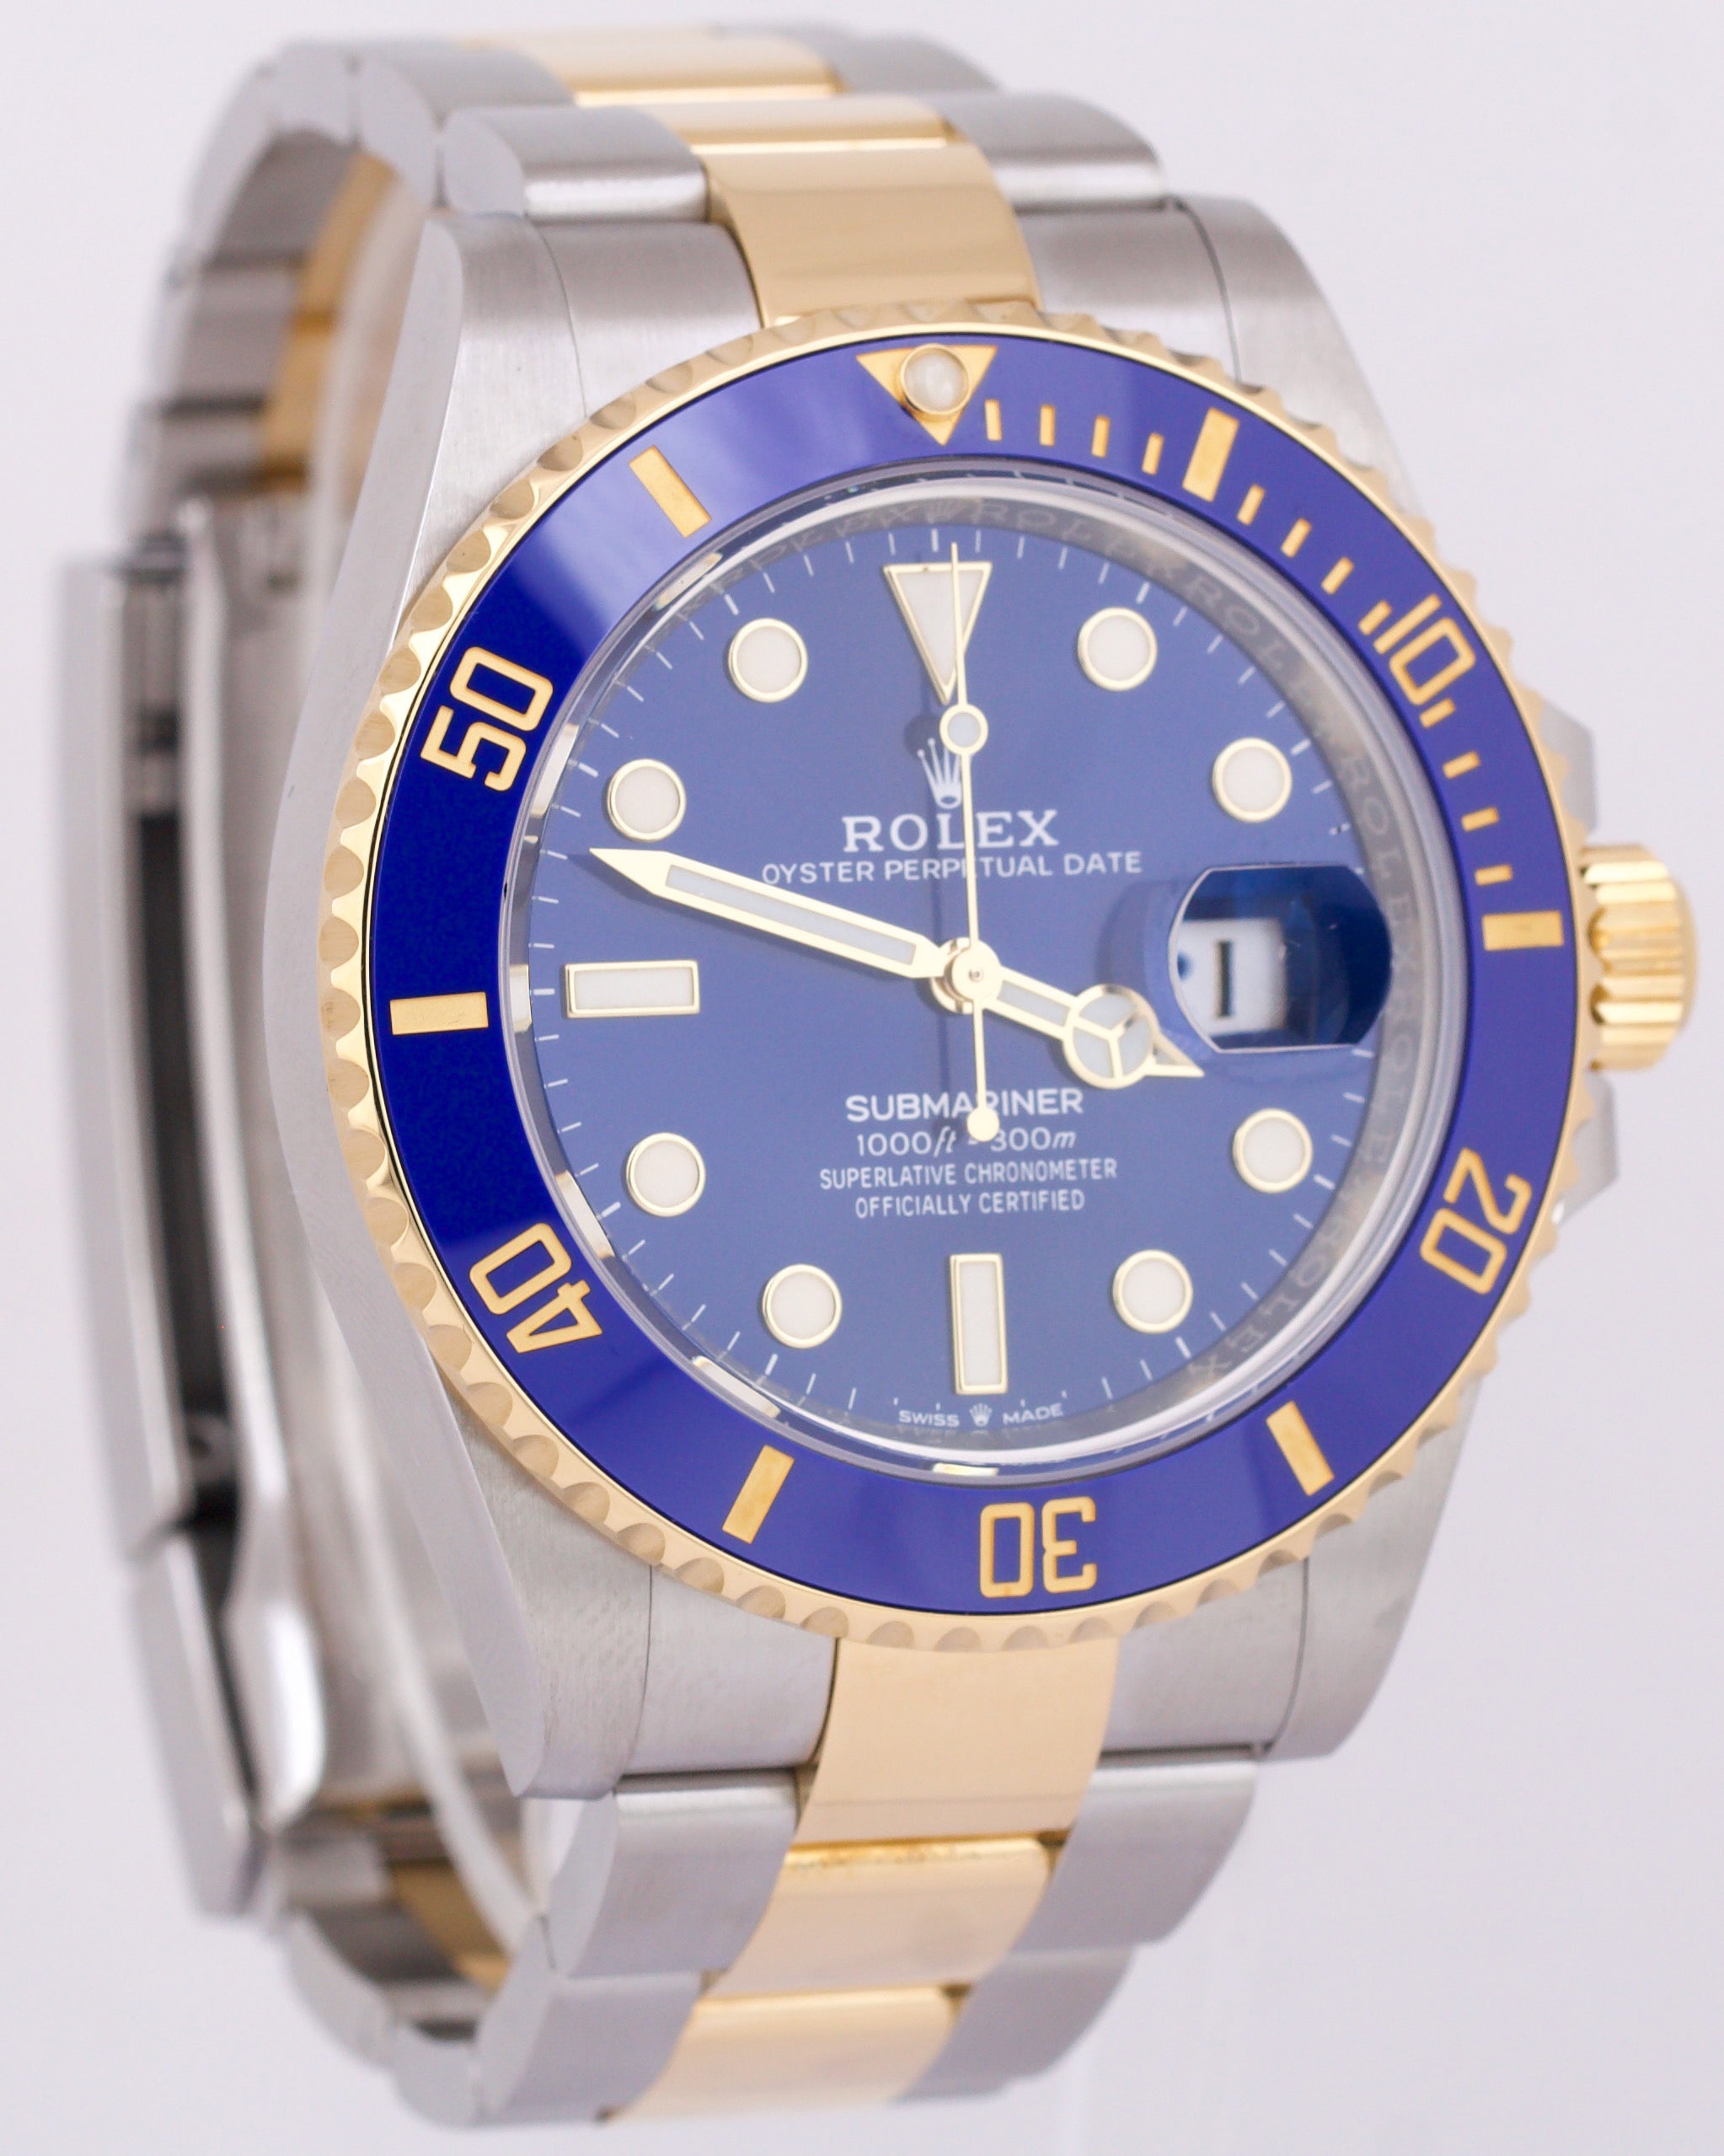 MINT Rolex Submariner Date 41mm BLUE Two-Tone 18K Yellow Gold 126613 LB Watch